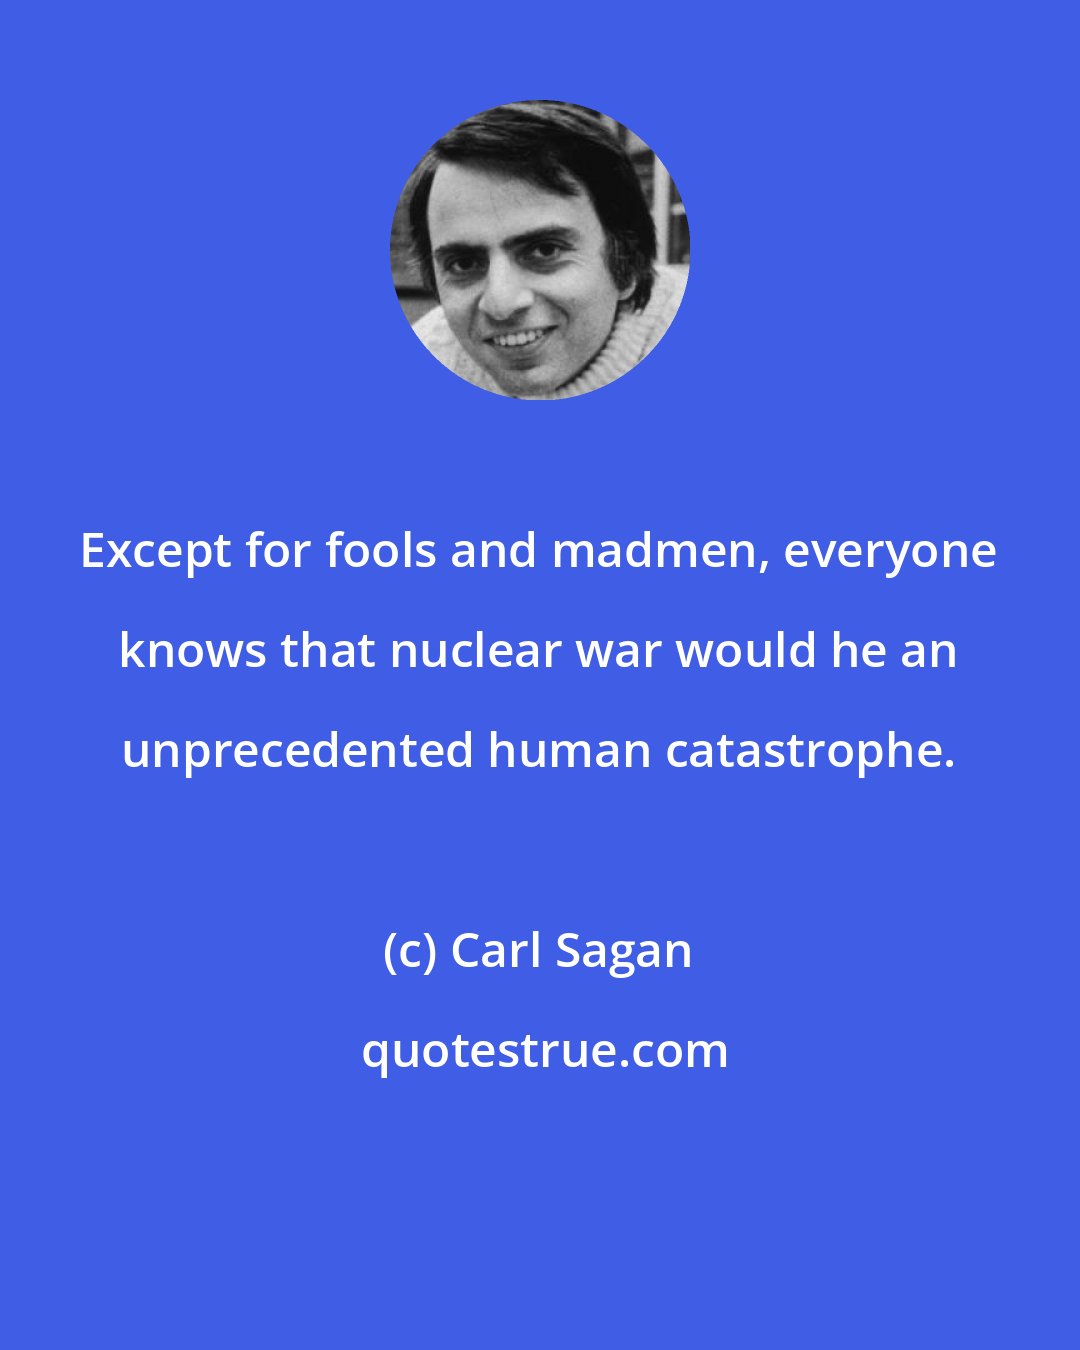 Carl Sagan: Except for fools and madmen, everyone knows that nuclear war would he an unprecedented human catastrophe.